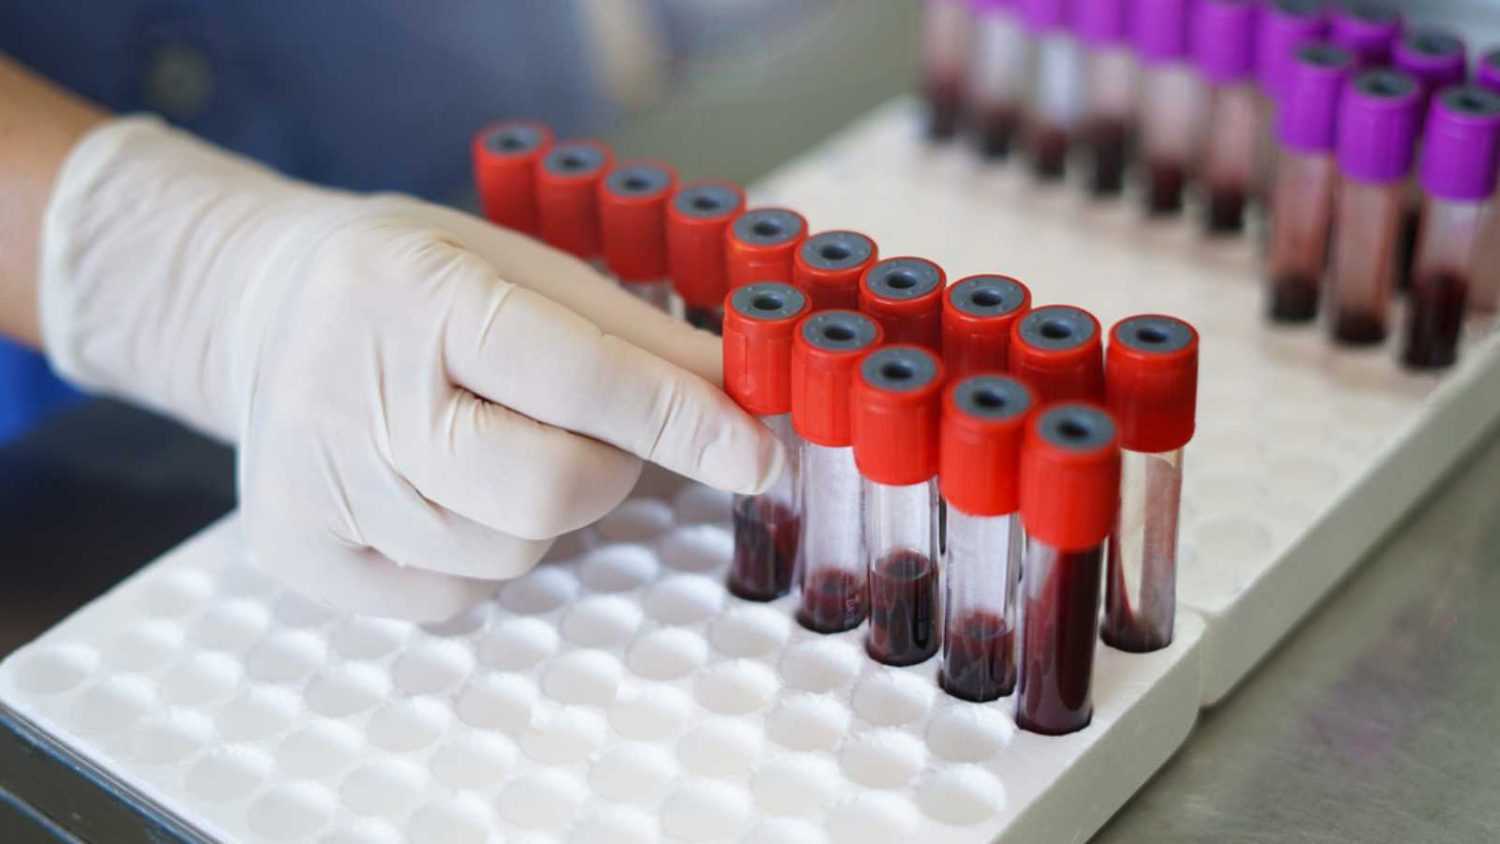 Blood taken from various patients for blood test